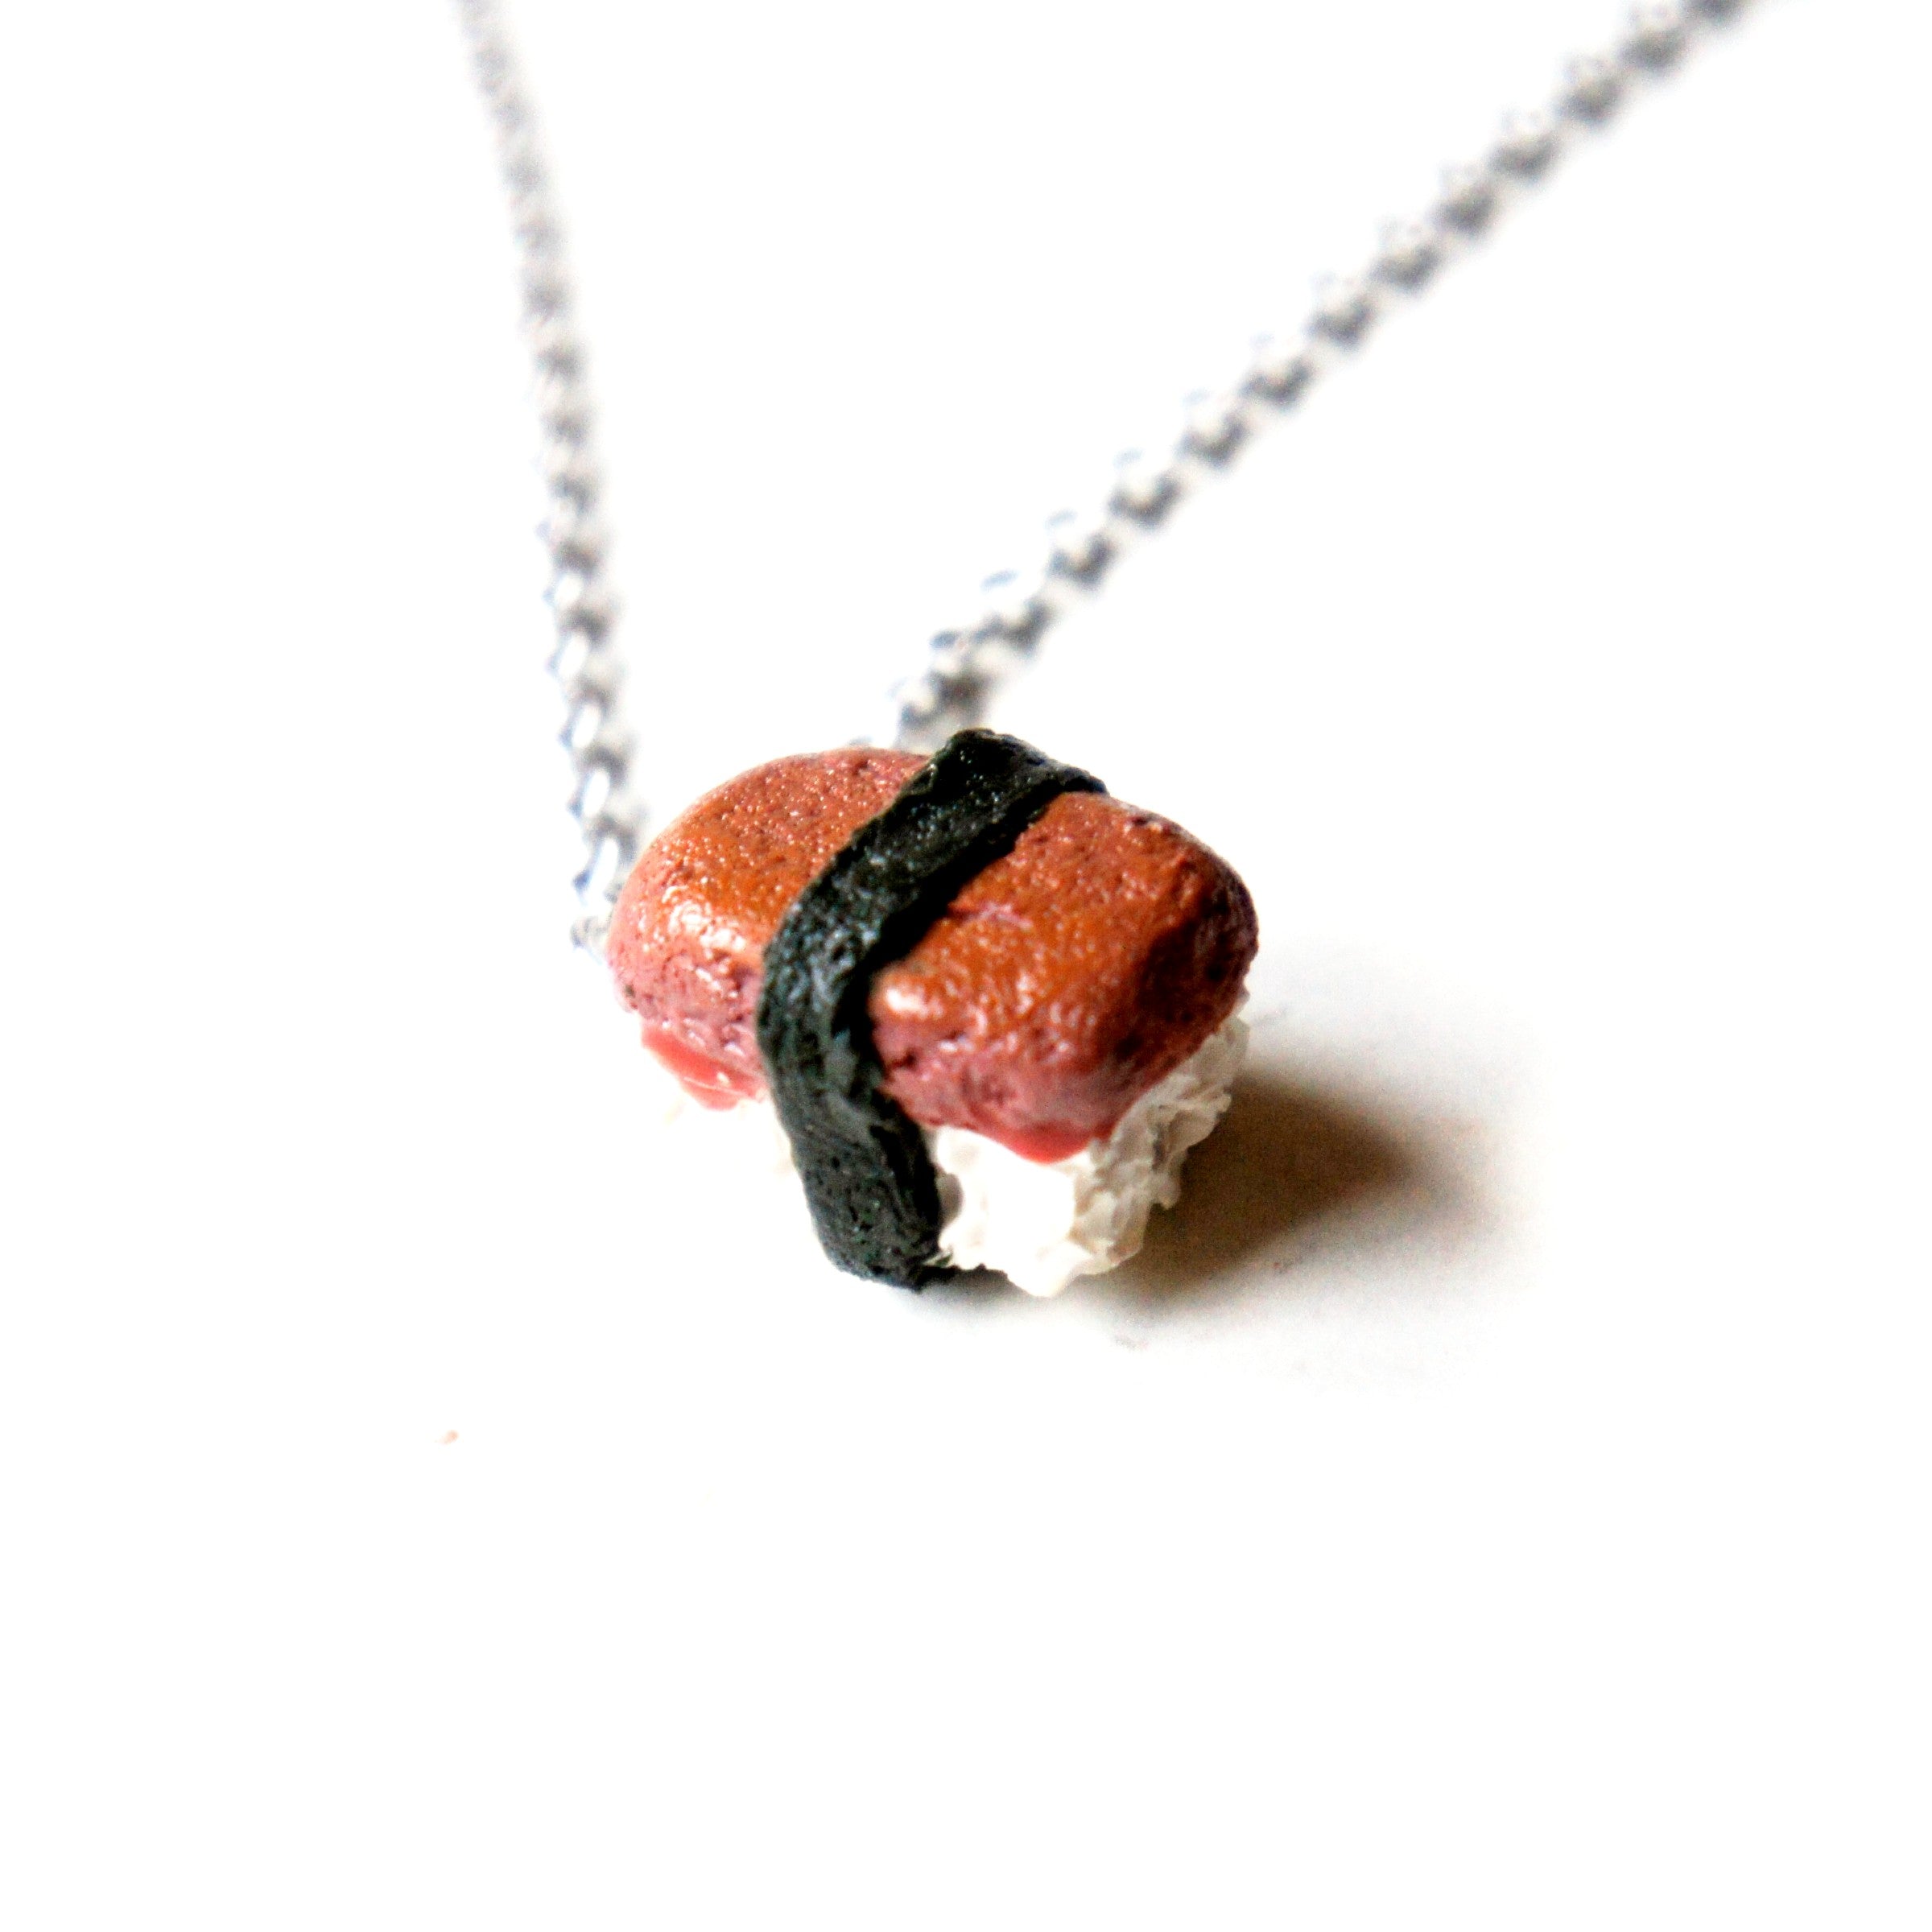 Spam Musubi Necklace - Jillicious charms and accessories